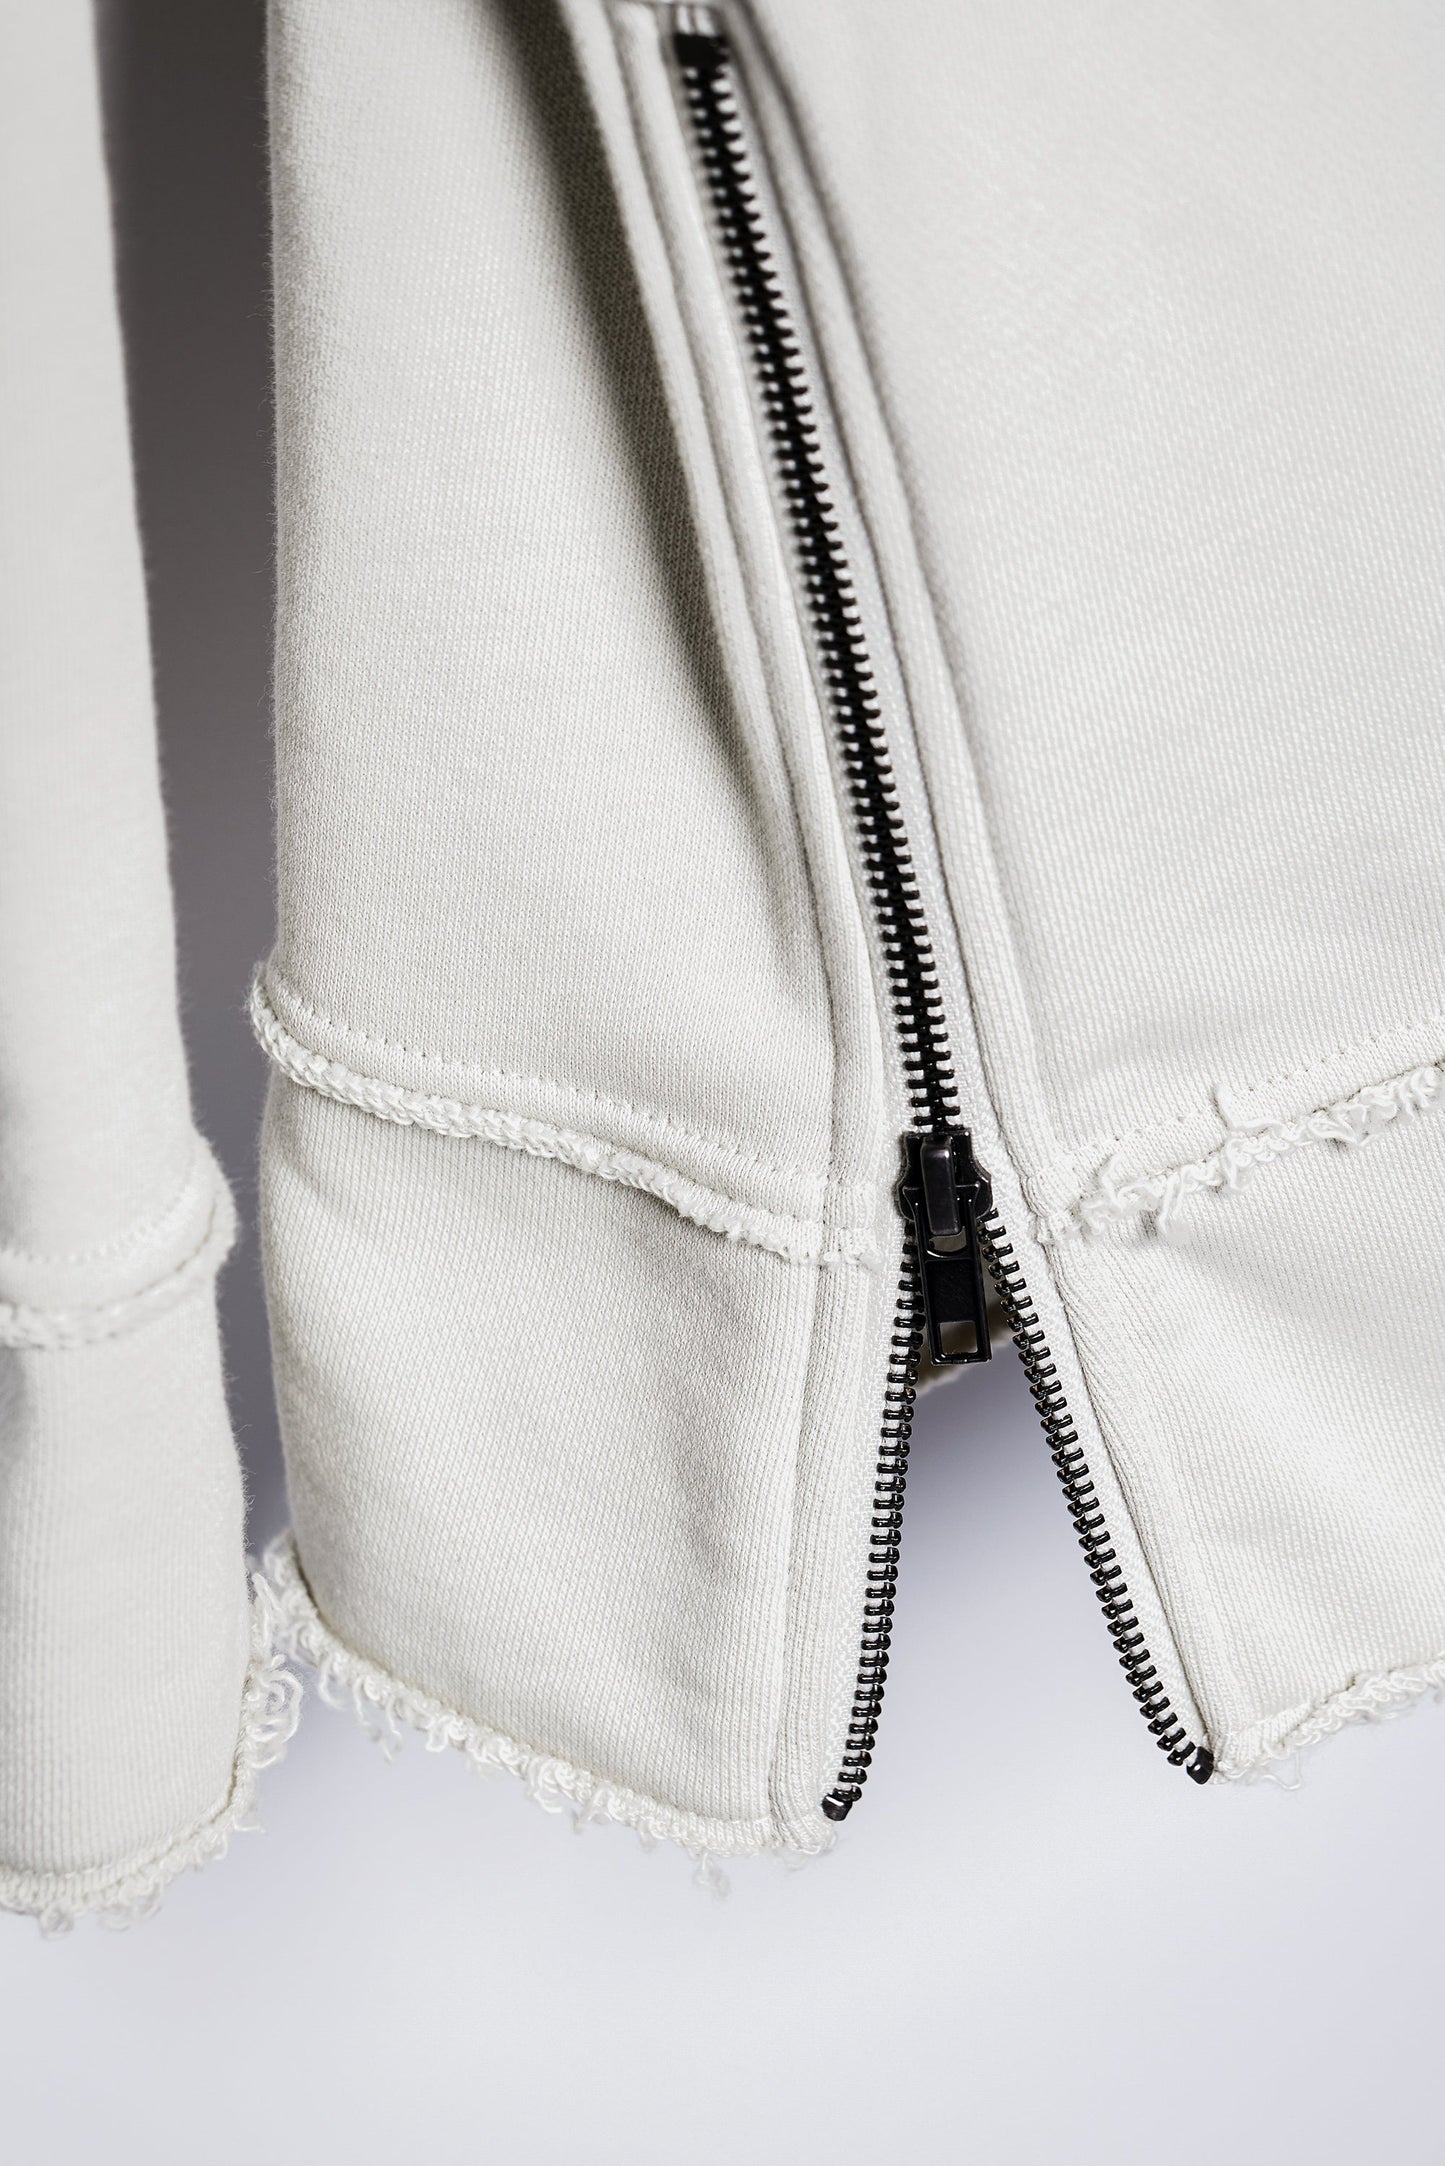 SIGMA 50: The Epic EDC Hoodie with Secret Pockets by Spindle